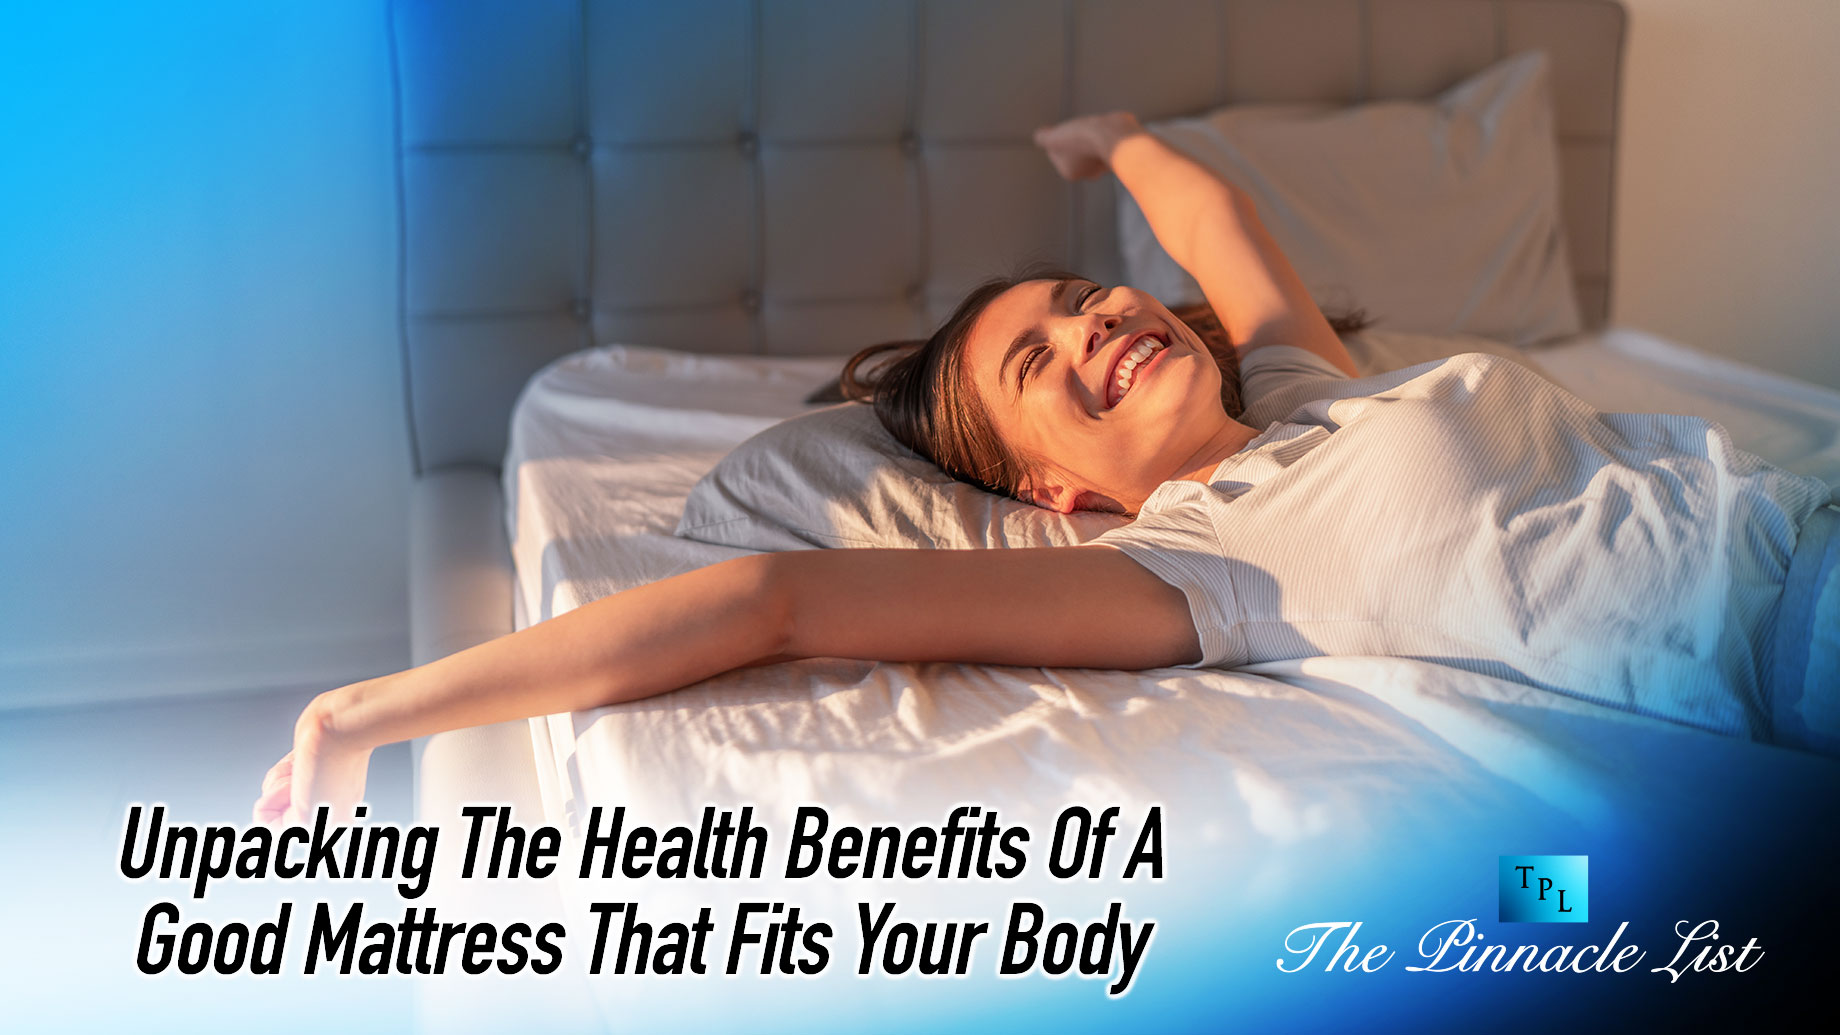 Unpacking The Health Benefits Of A Good Mattress That Fits Your Body